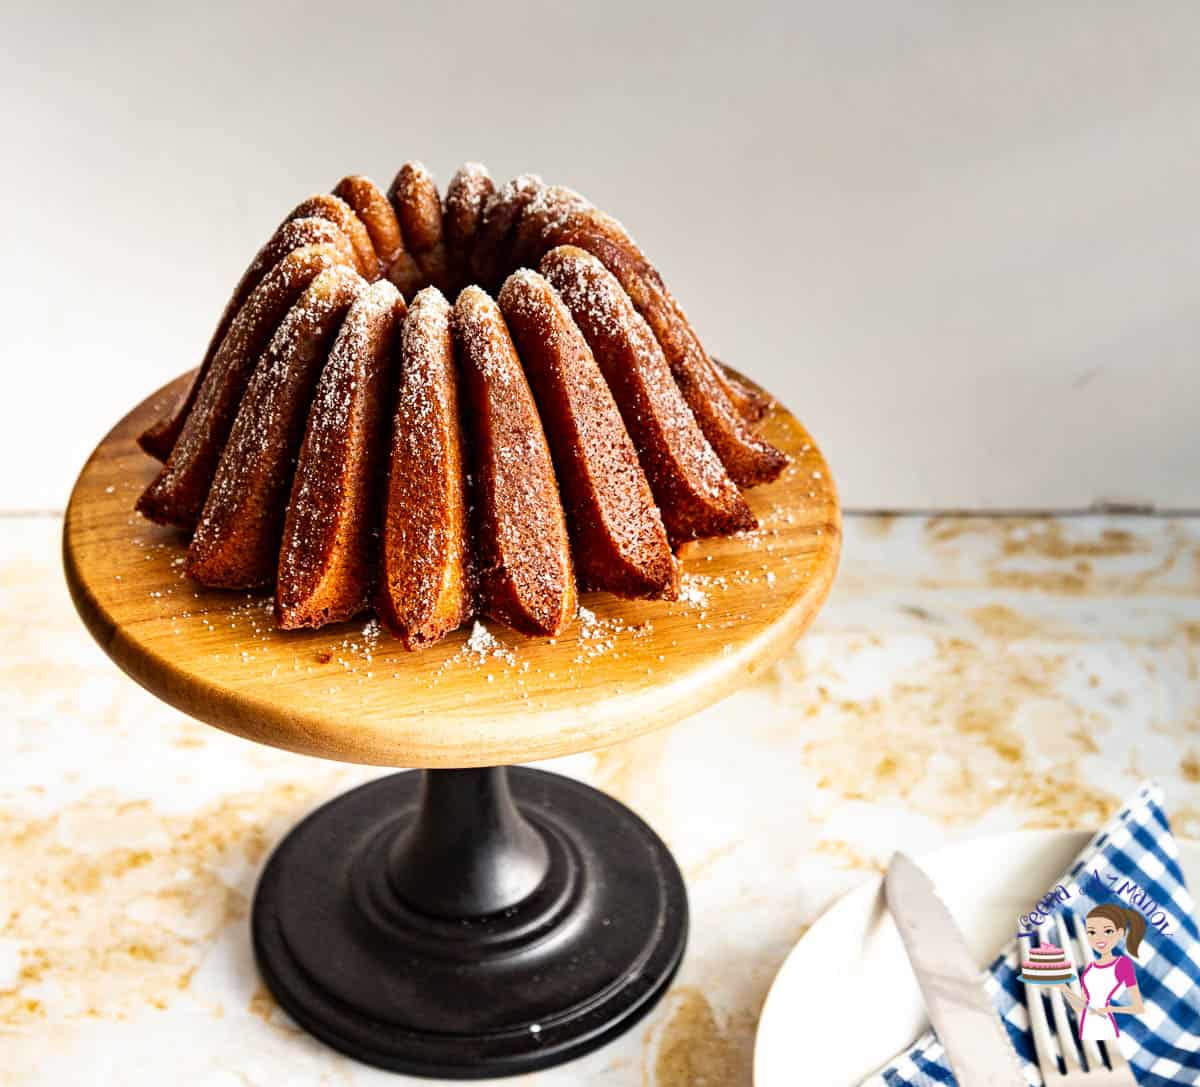 Bundt cake on a wooden cake stand